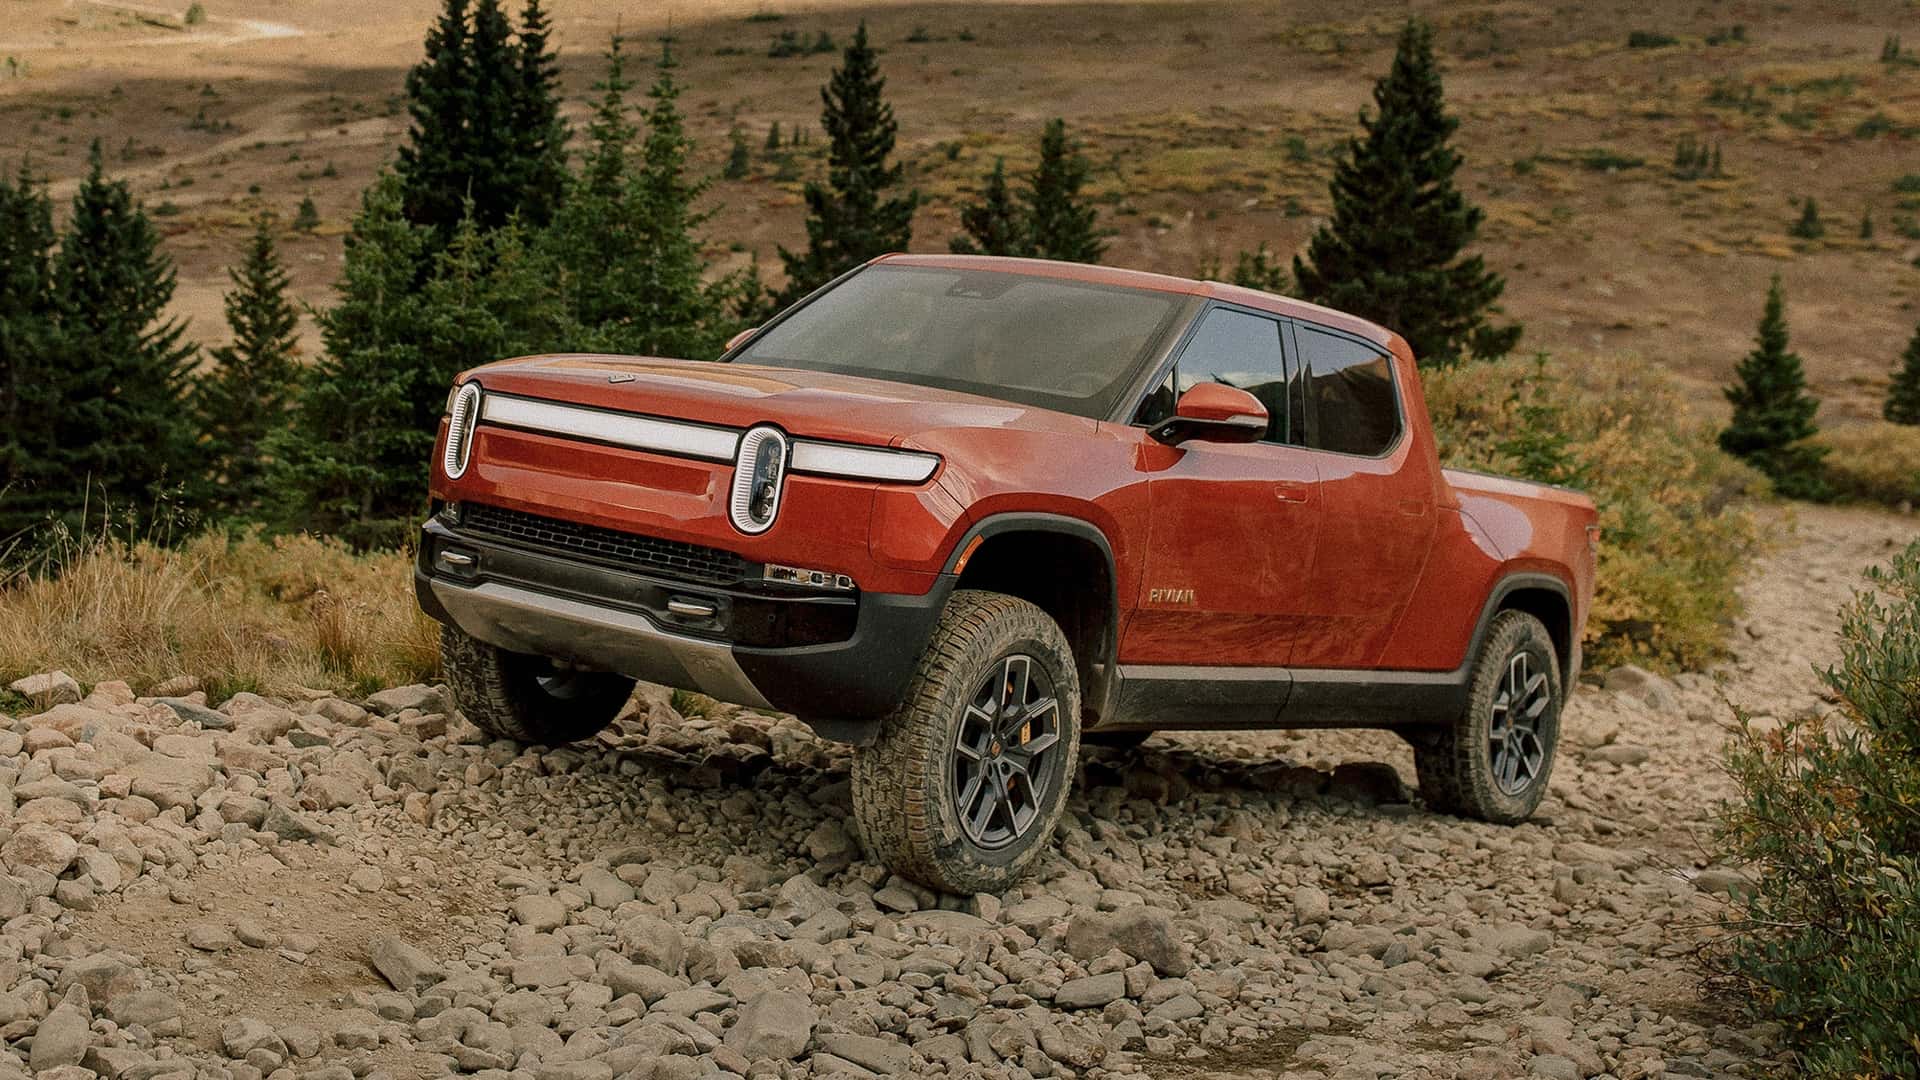 2022 rivian r1t launch edition ownership review after 17k miles